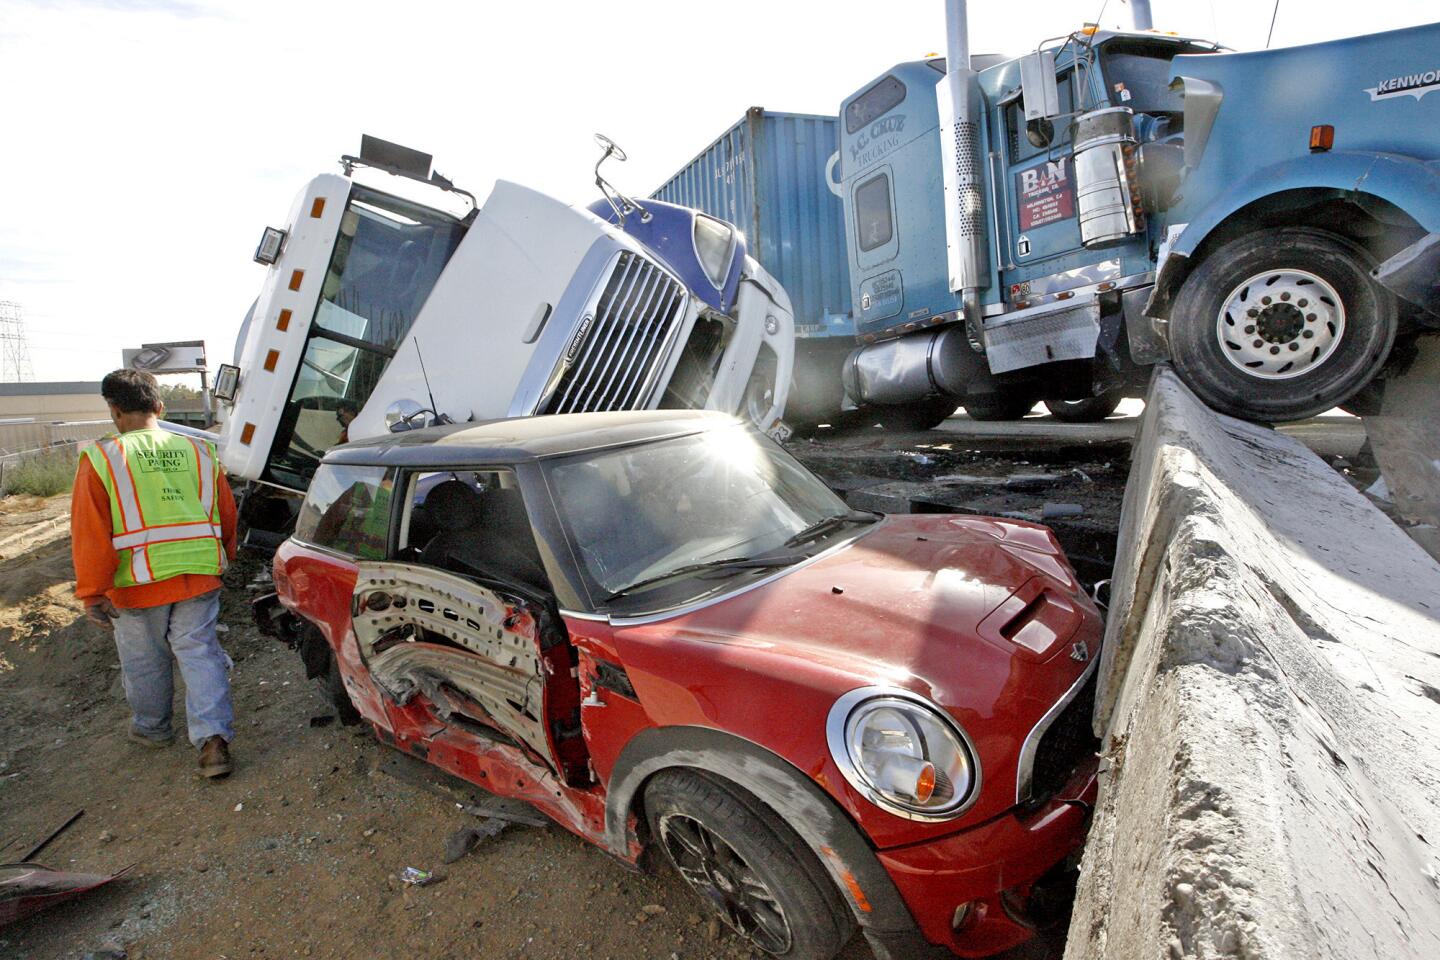 A construction worker walks past a crash on the northbound I-5 freeway before Western Ave. involving two big rigs and a Mini Cooper on Wednesday, November 14, 2012. There were no injuries, although one big rig, a oil tanker, was leaking waste oil. (Roger Wilson/Staff Photographer)